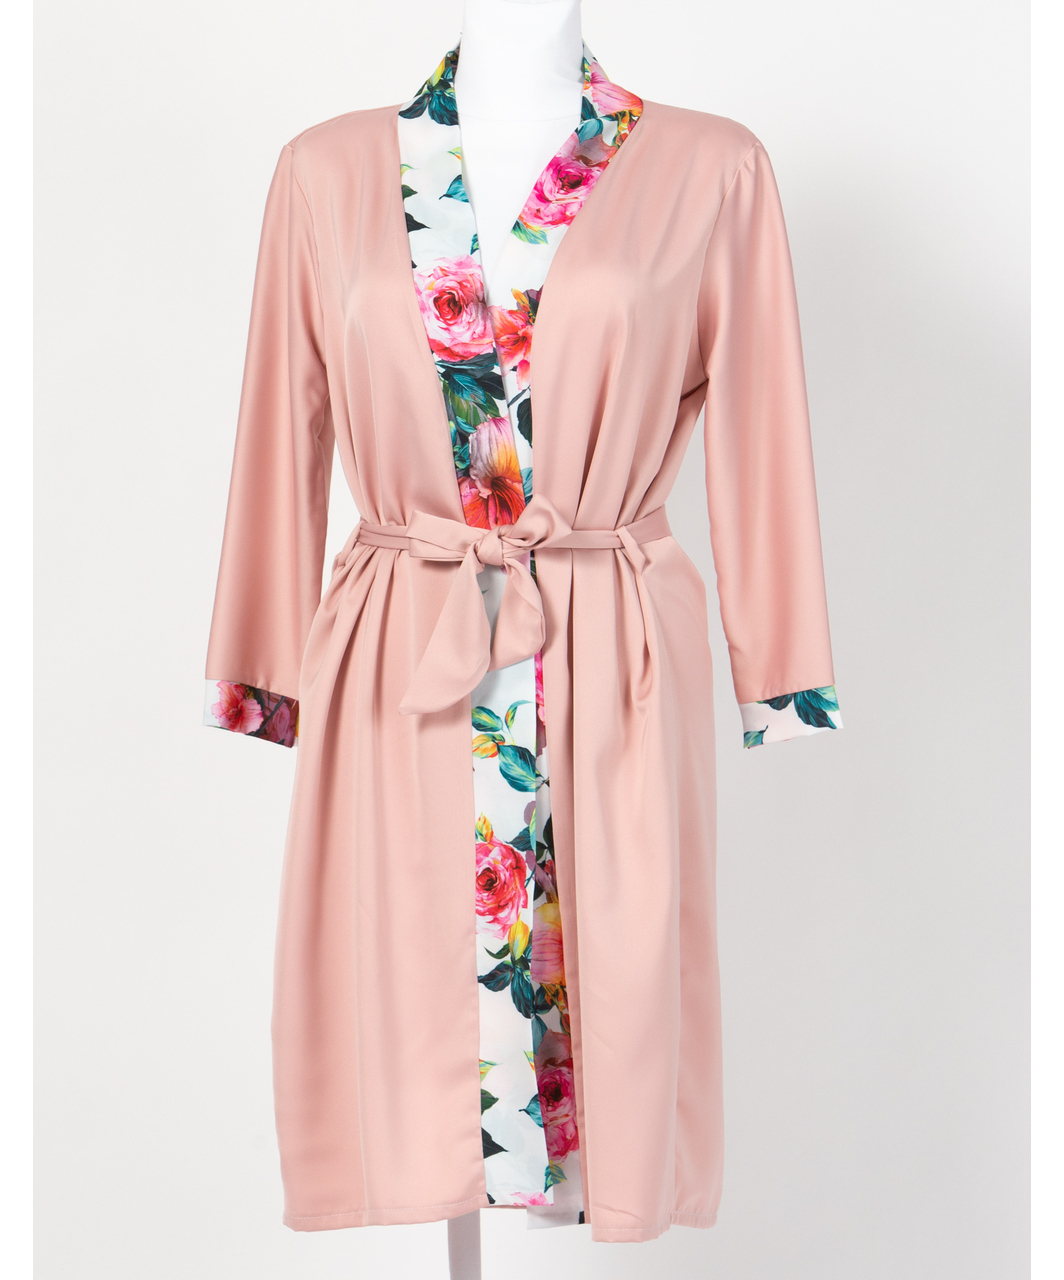 MAKE Light Old Pink Robe with Colorful Edge